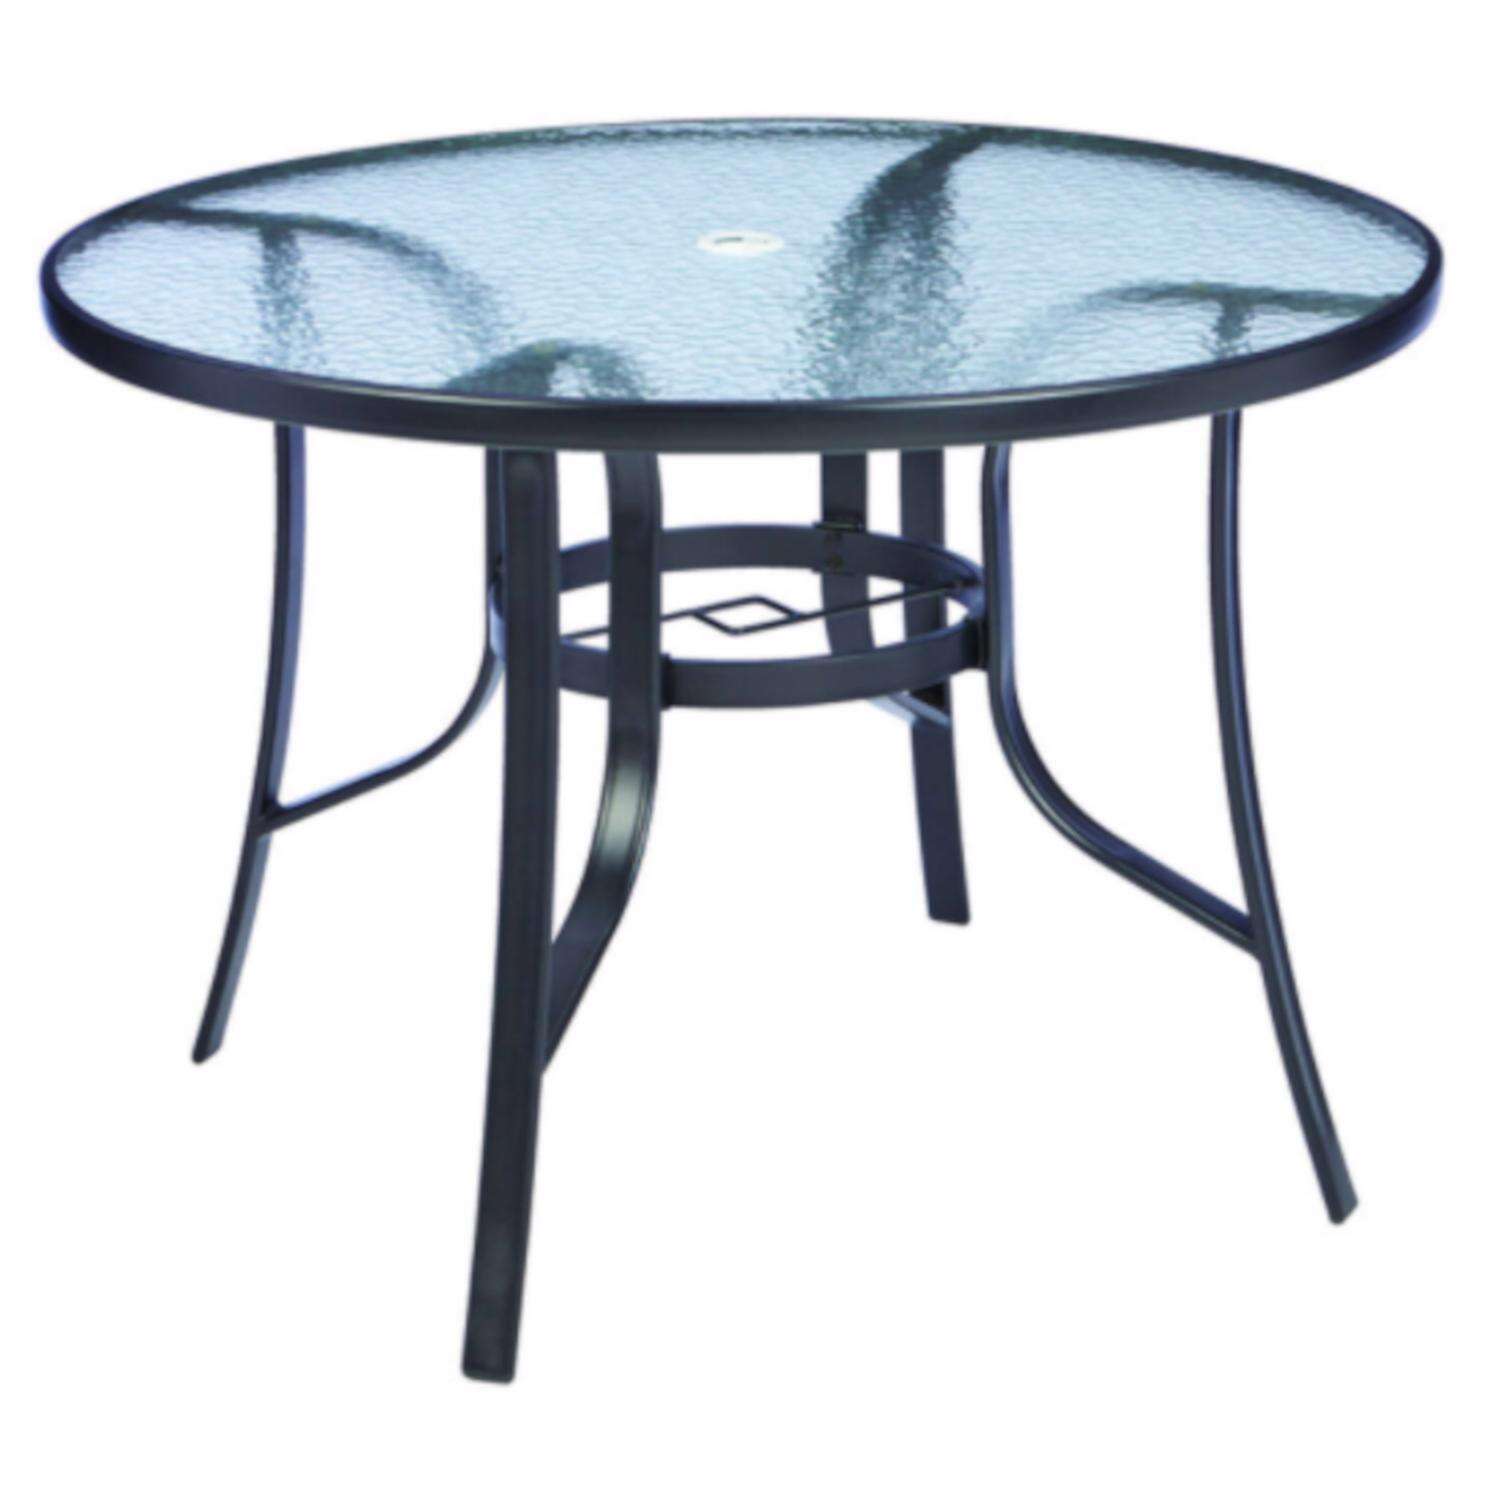 Living Accents Fairview Black Round Glass Dining Table